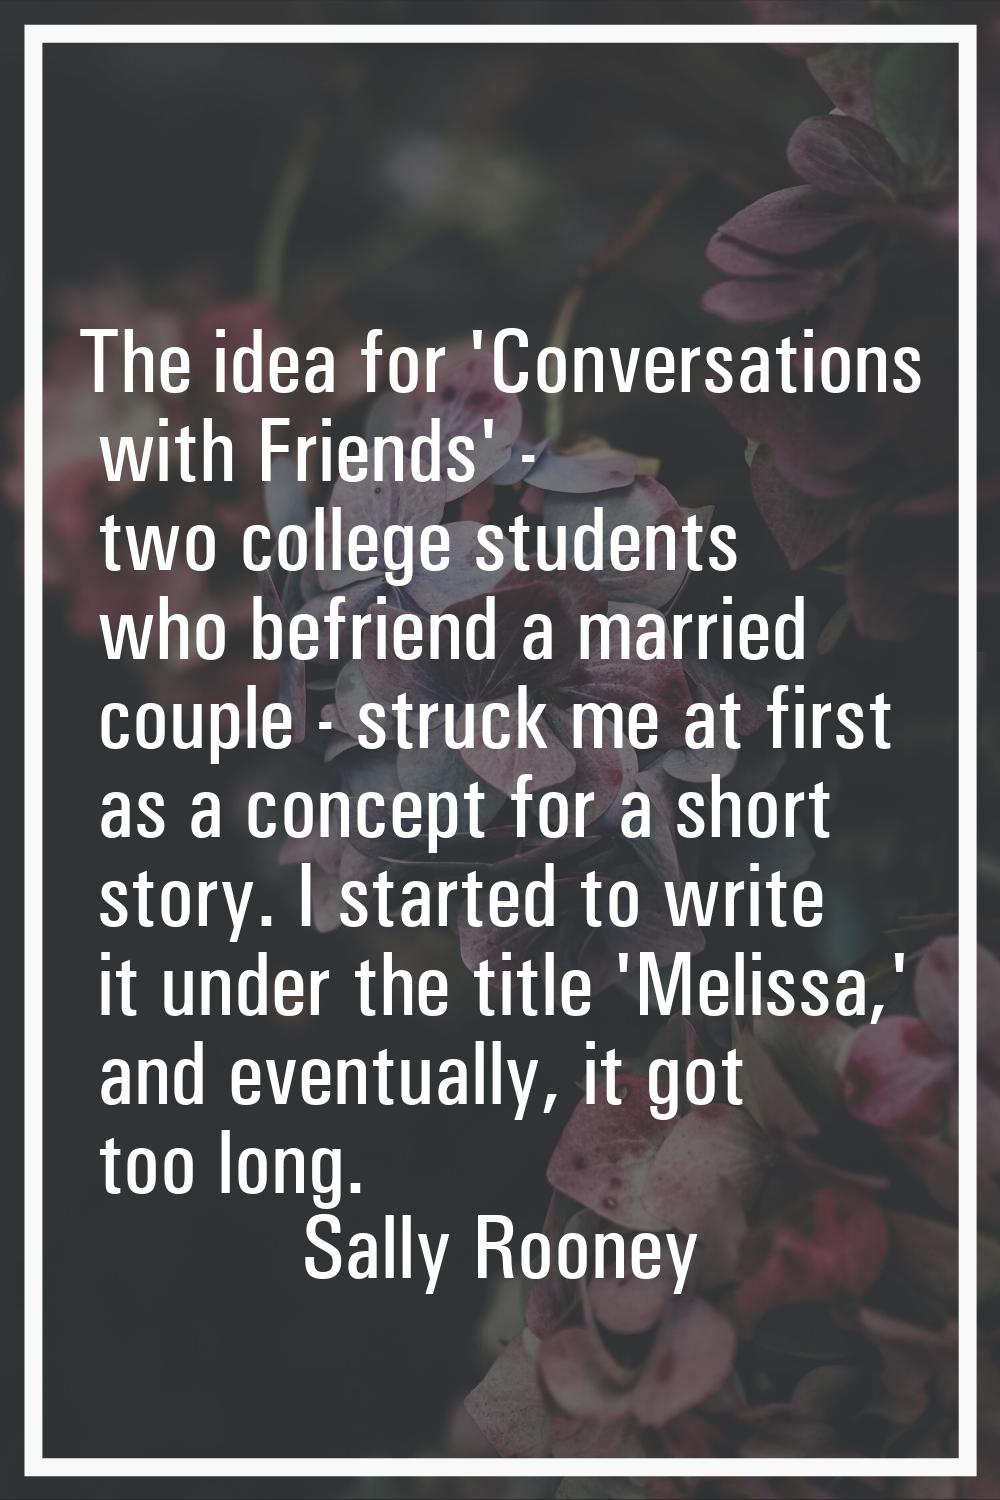 The idea for 'Conversations with Friends' - two college students who befriend a married couple - st